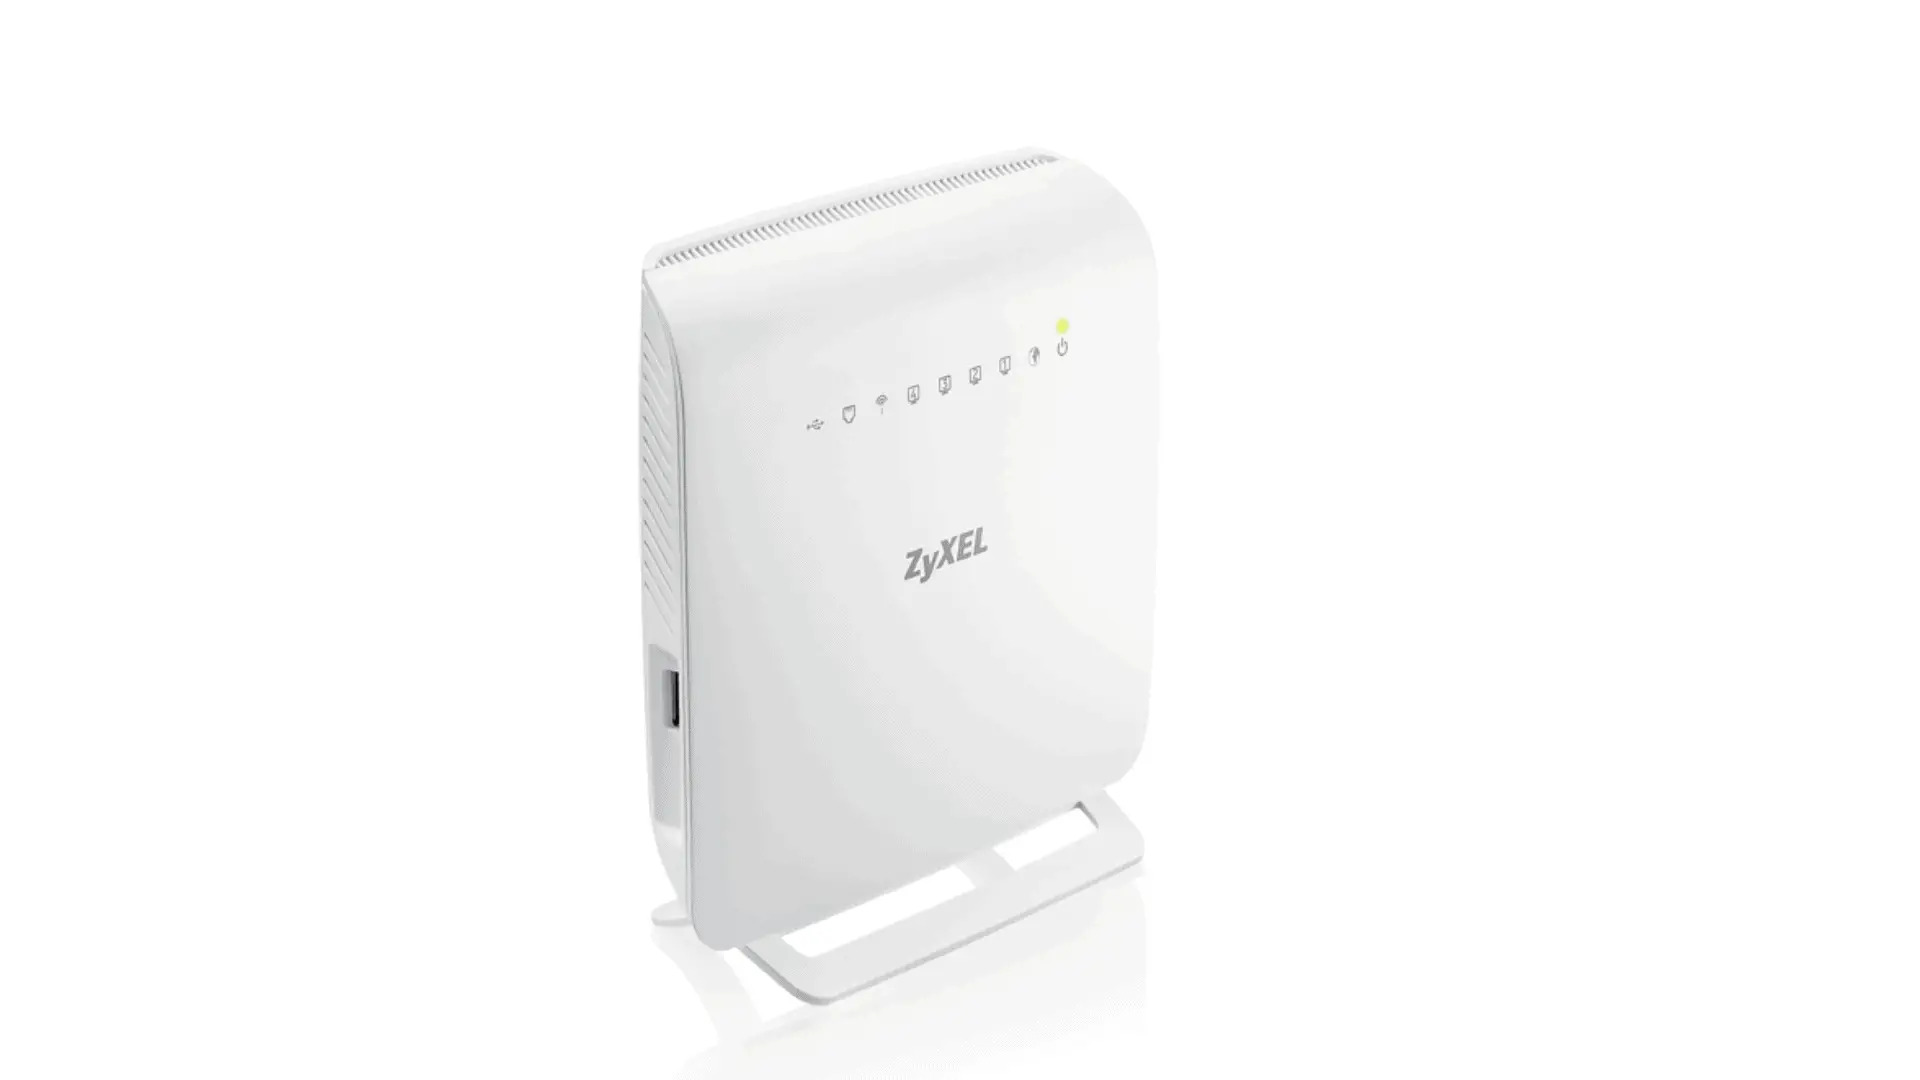 Here's How to Login to the ZyXEL Router